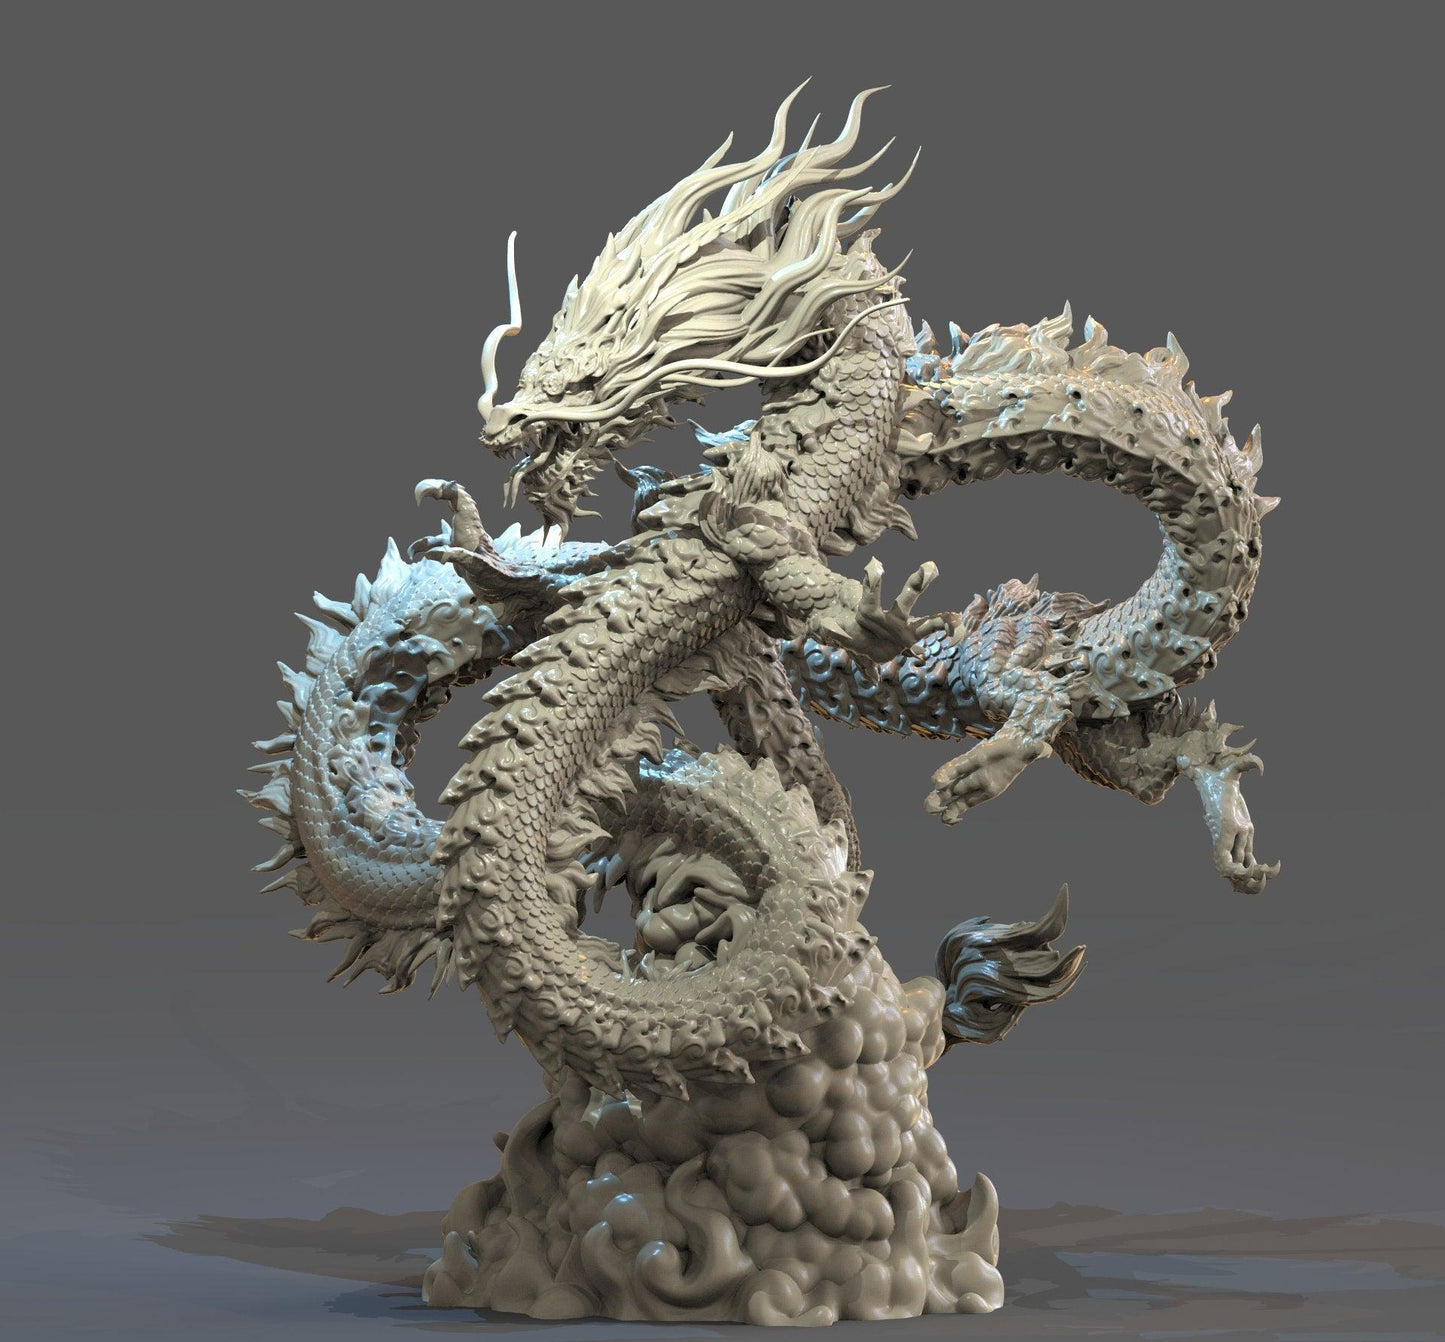 Watatsumi Miniature | Majestic Japanese Sea King Monster for DnD 5e | 32mm Scale - Plague Miniatures shop for DnD Miniatures